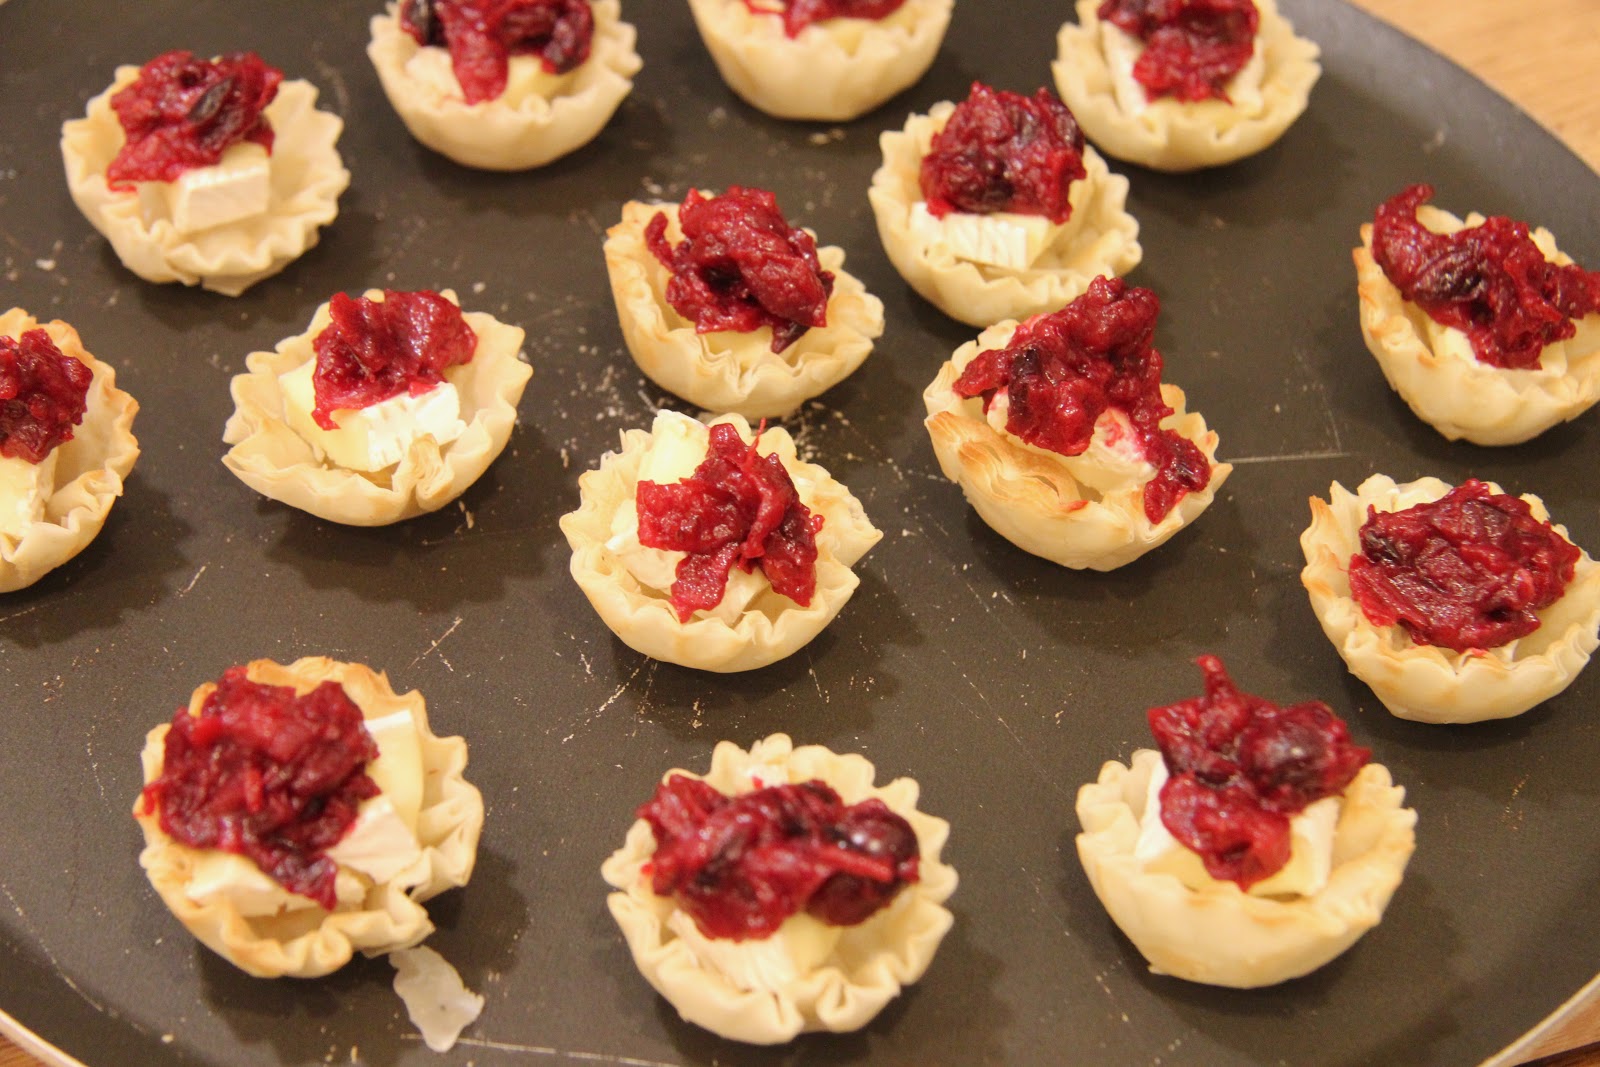 Camembert and Cranberry Tartletts - The Culinary Chase